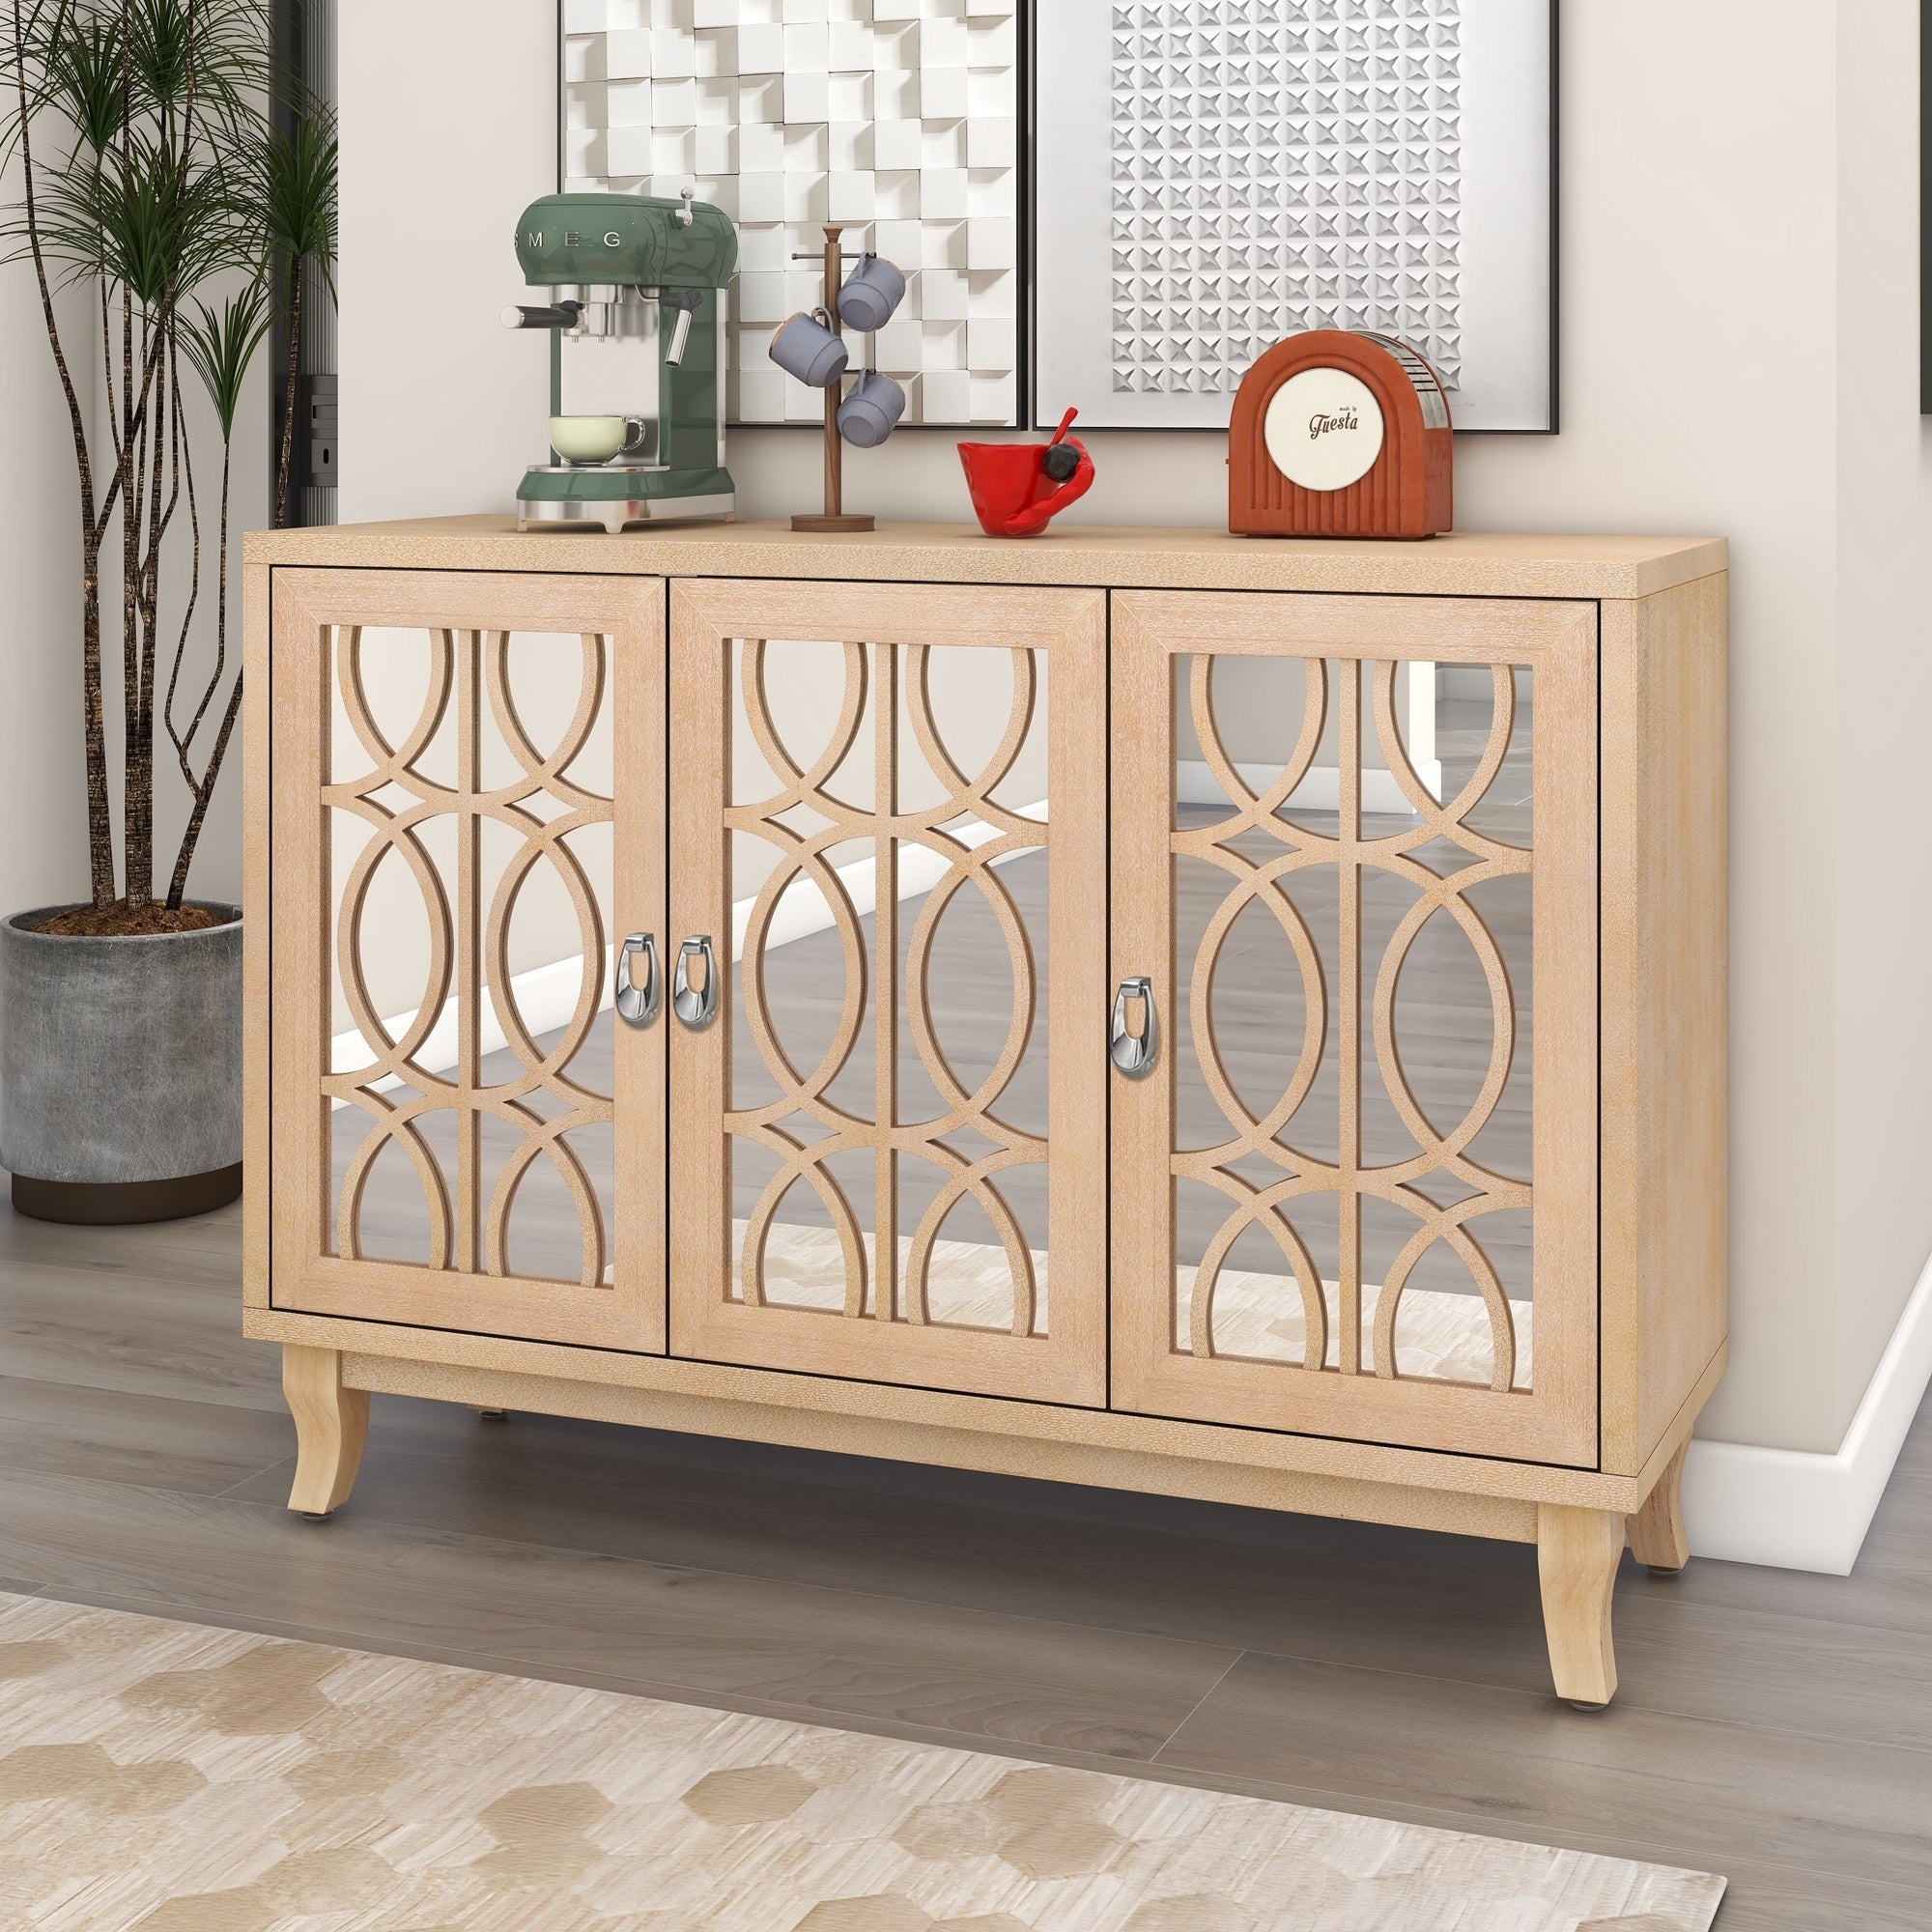 47" Accent Console Table Sideboard with Mirrored Door, Natural Wood wash color